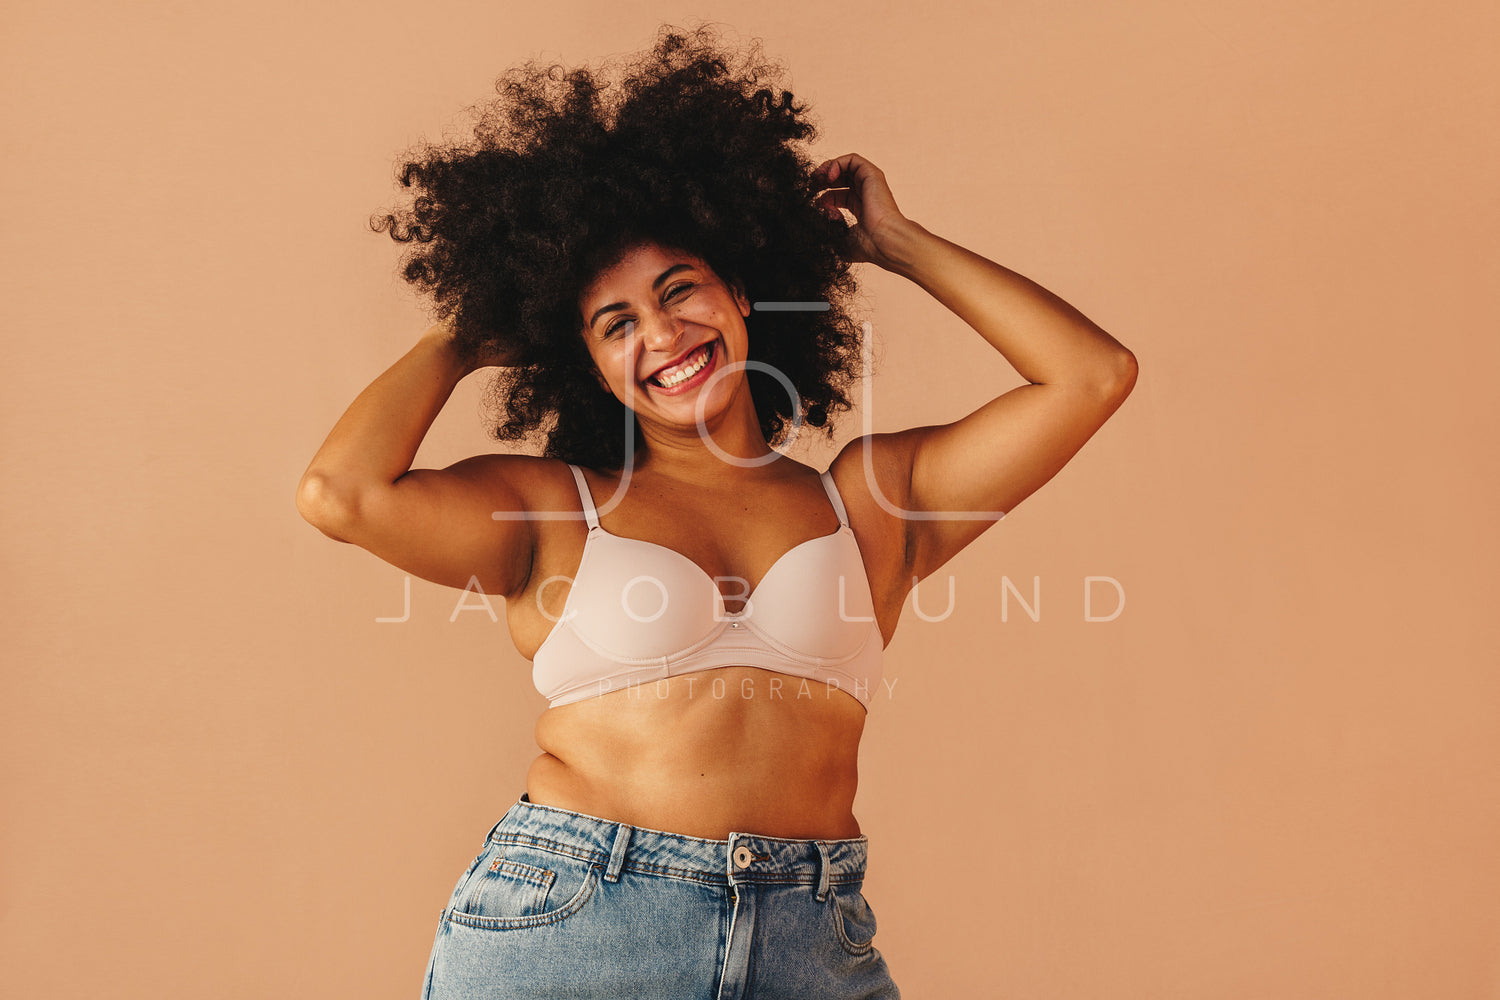 Premium Photo  Long haired women wearing bras stand together and embracing